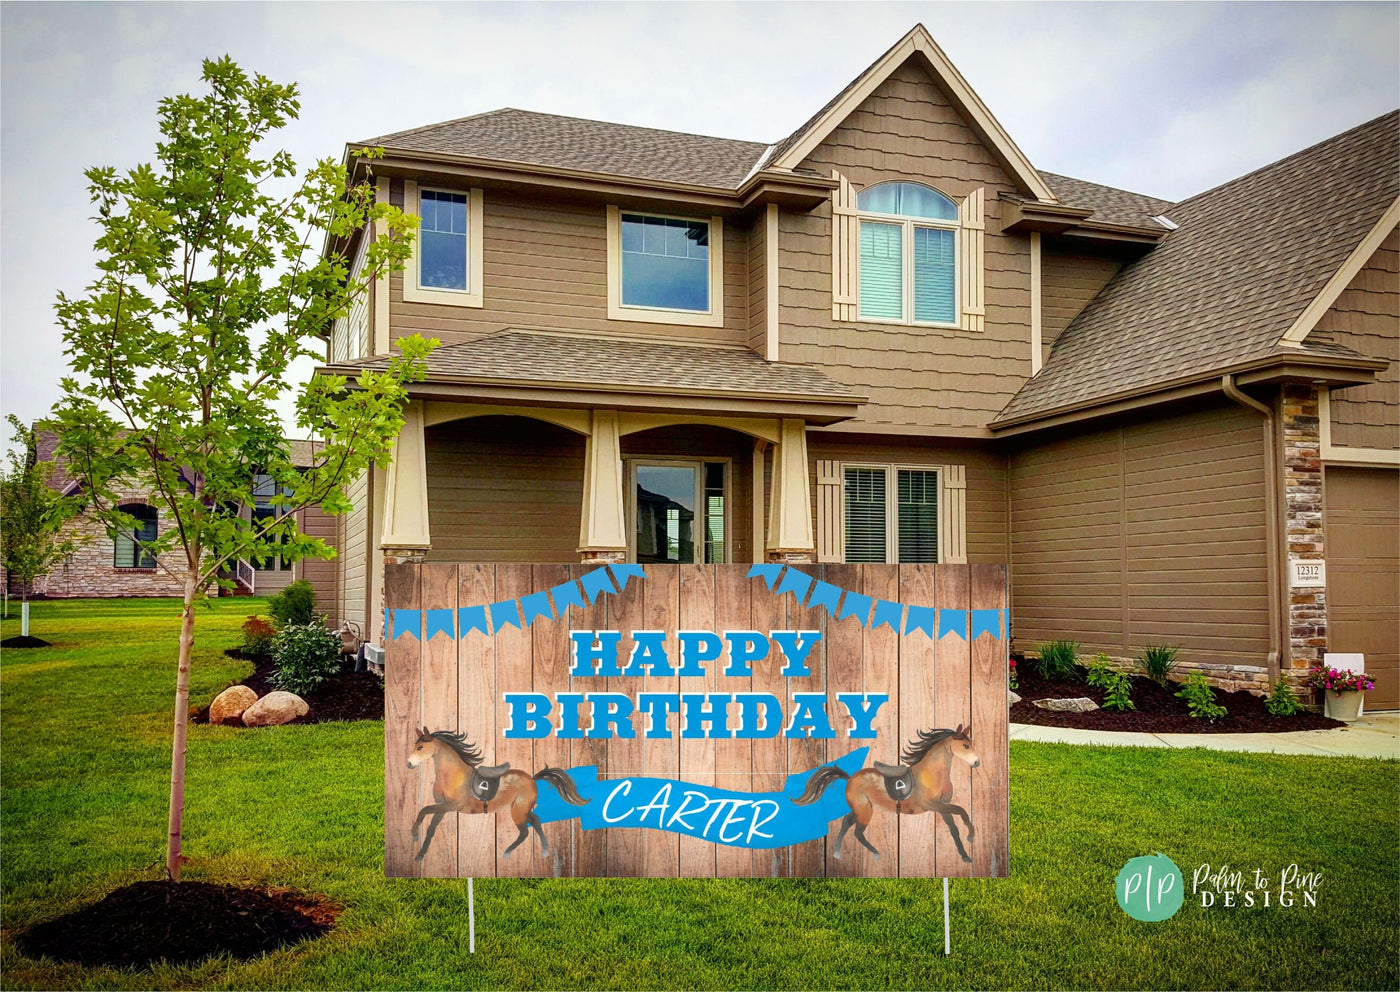 Cowboy Birthday Banner, Western Cowboy Party Decor, Horse Birthday Party Decorations, Birthday Banner, My First Rodeo, My Second Rodeo, Cow